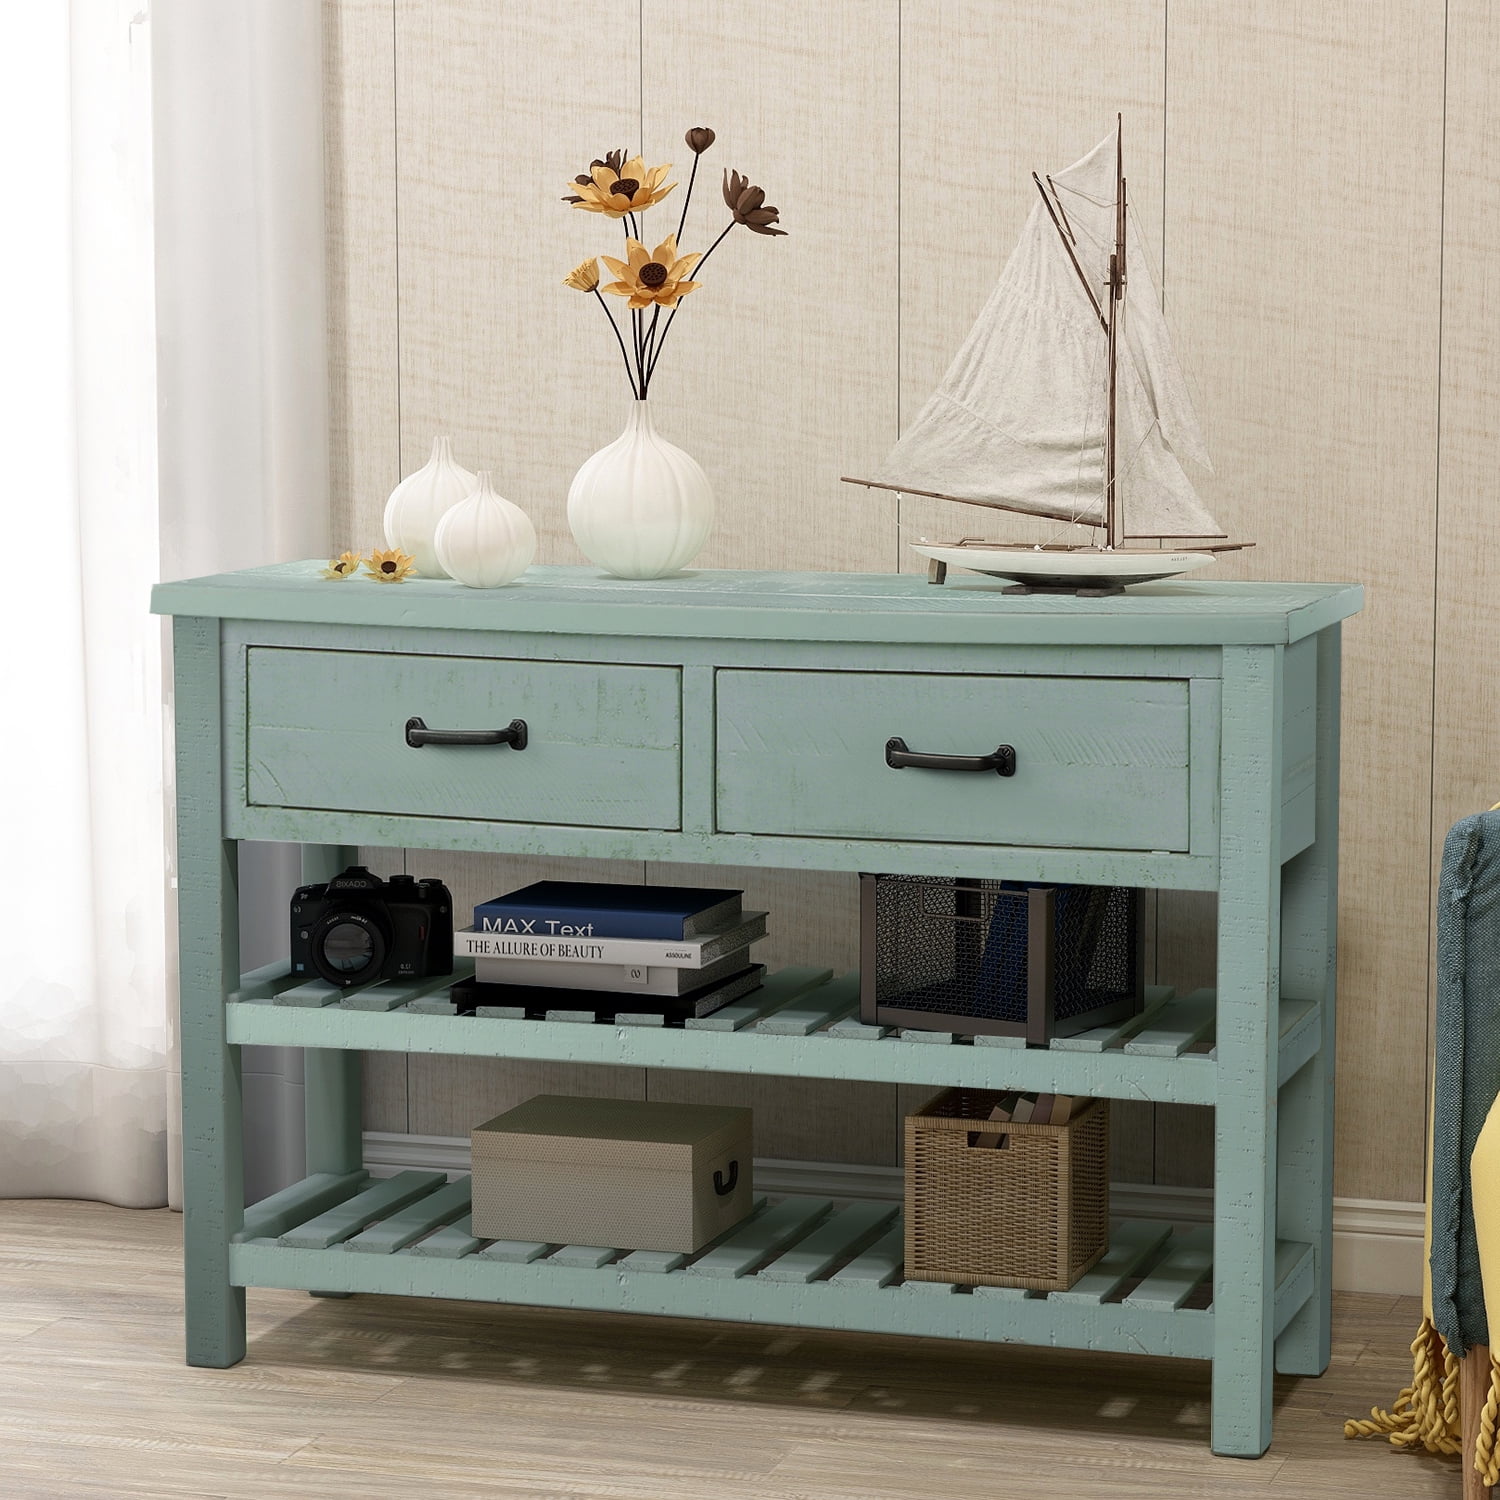 Clearance! Console Table for Entryway, Sideboard Wooden Sofa Table with Storage Drawers Cabinets ...